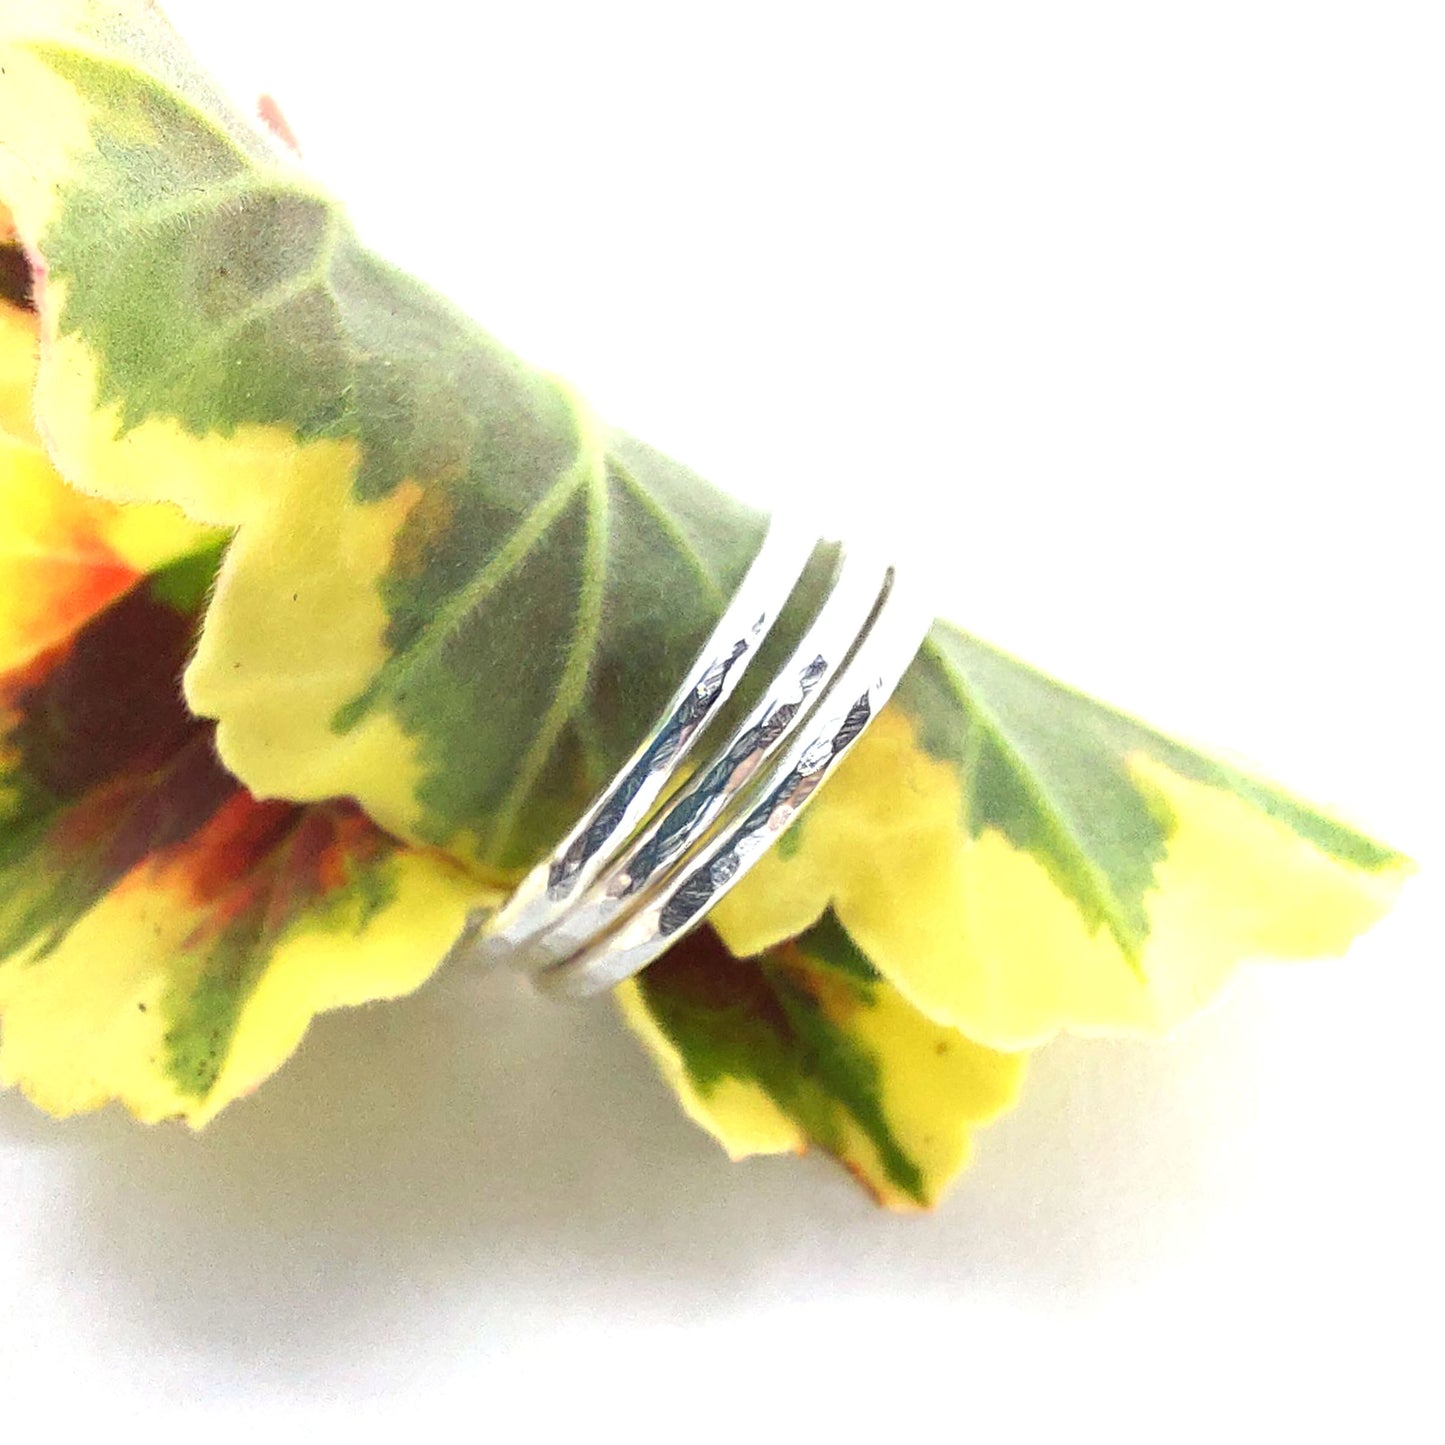 A set of 3 thin silver stacking rings with a hammered finish. Shown pictured on a leaf.